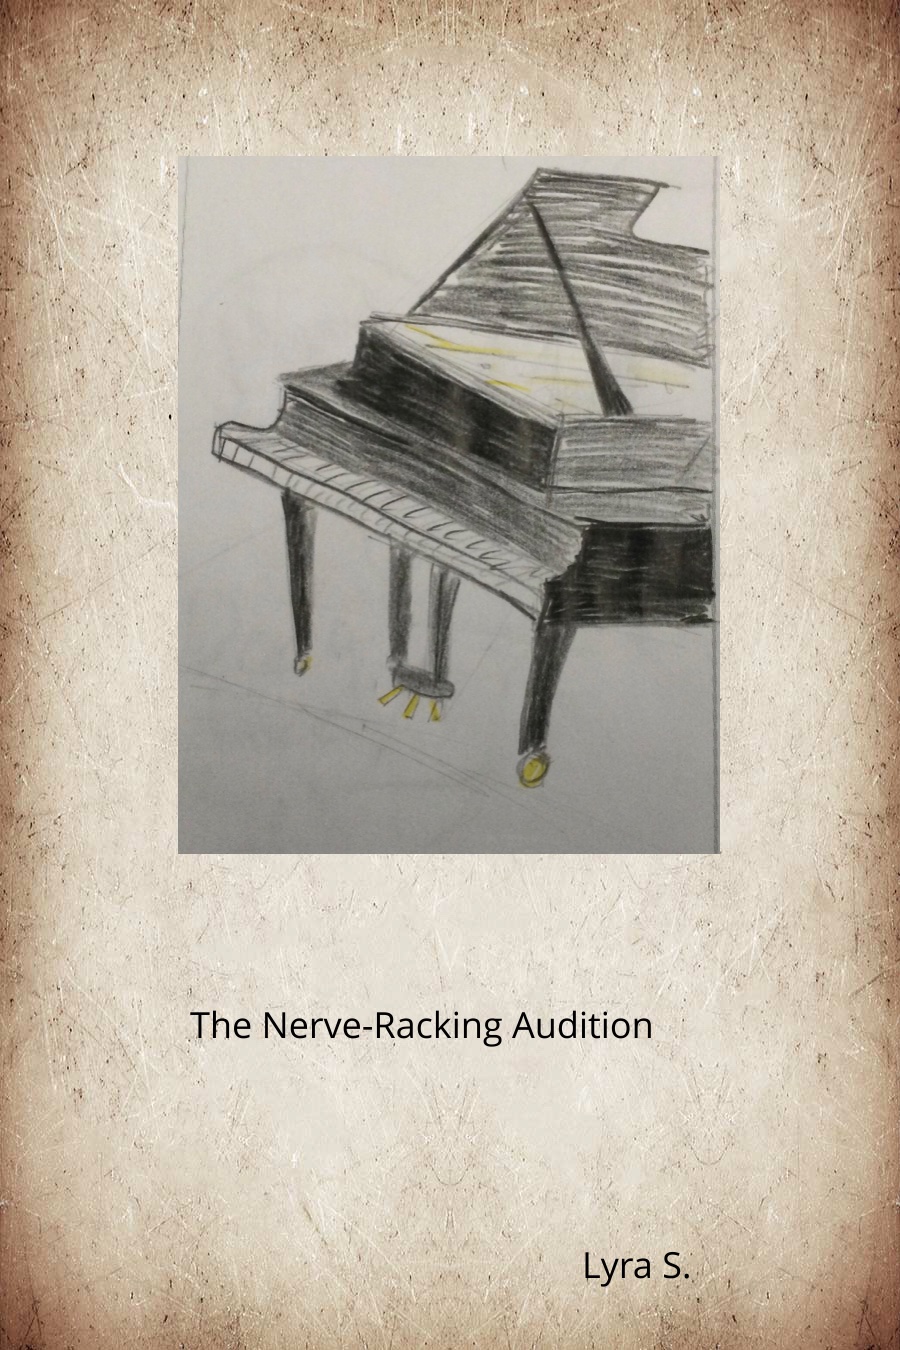 The Nerve-Racking Audition by Lyra S